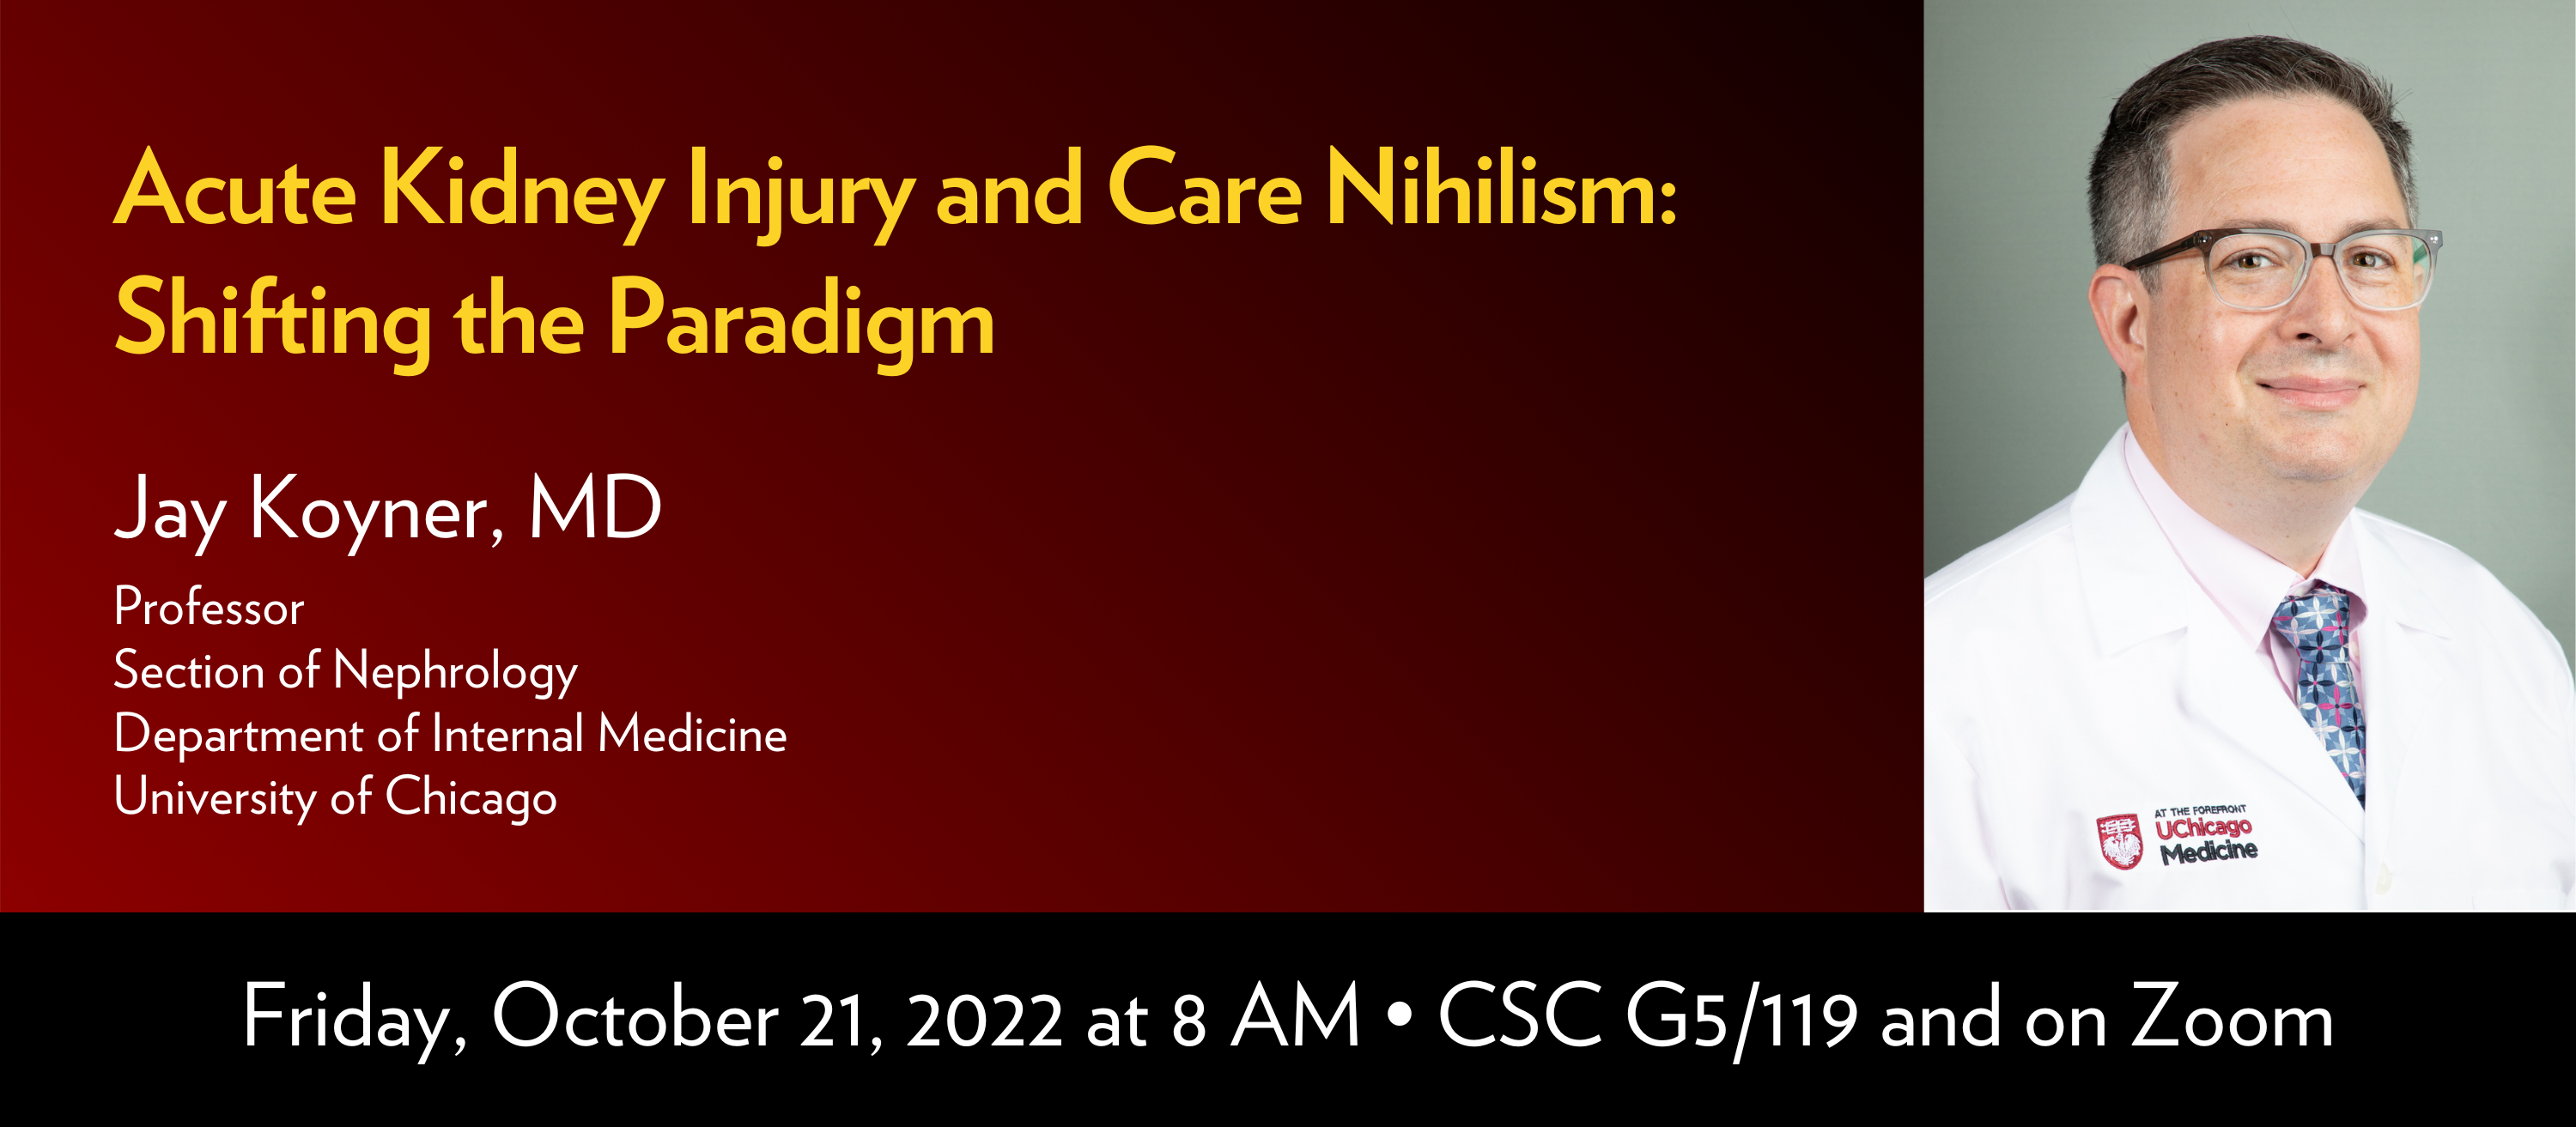 Title: Acute Kidney Injury and Care Nihilism Shifting the Paradigm